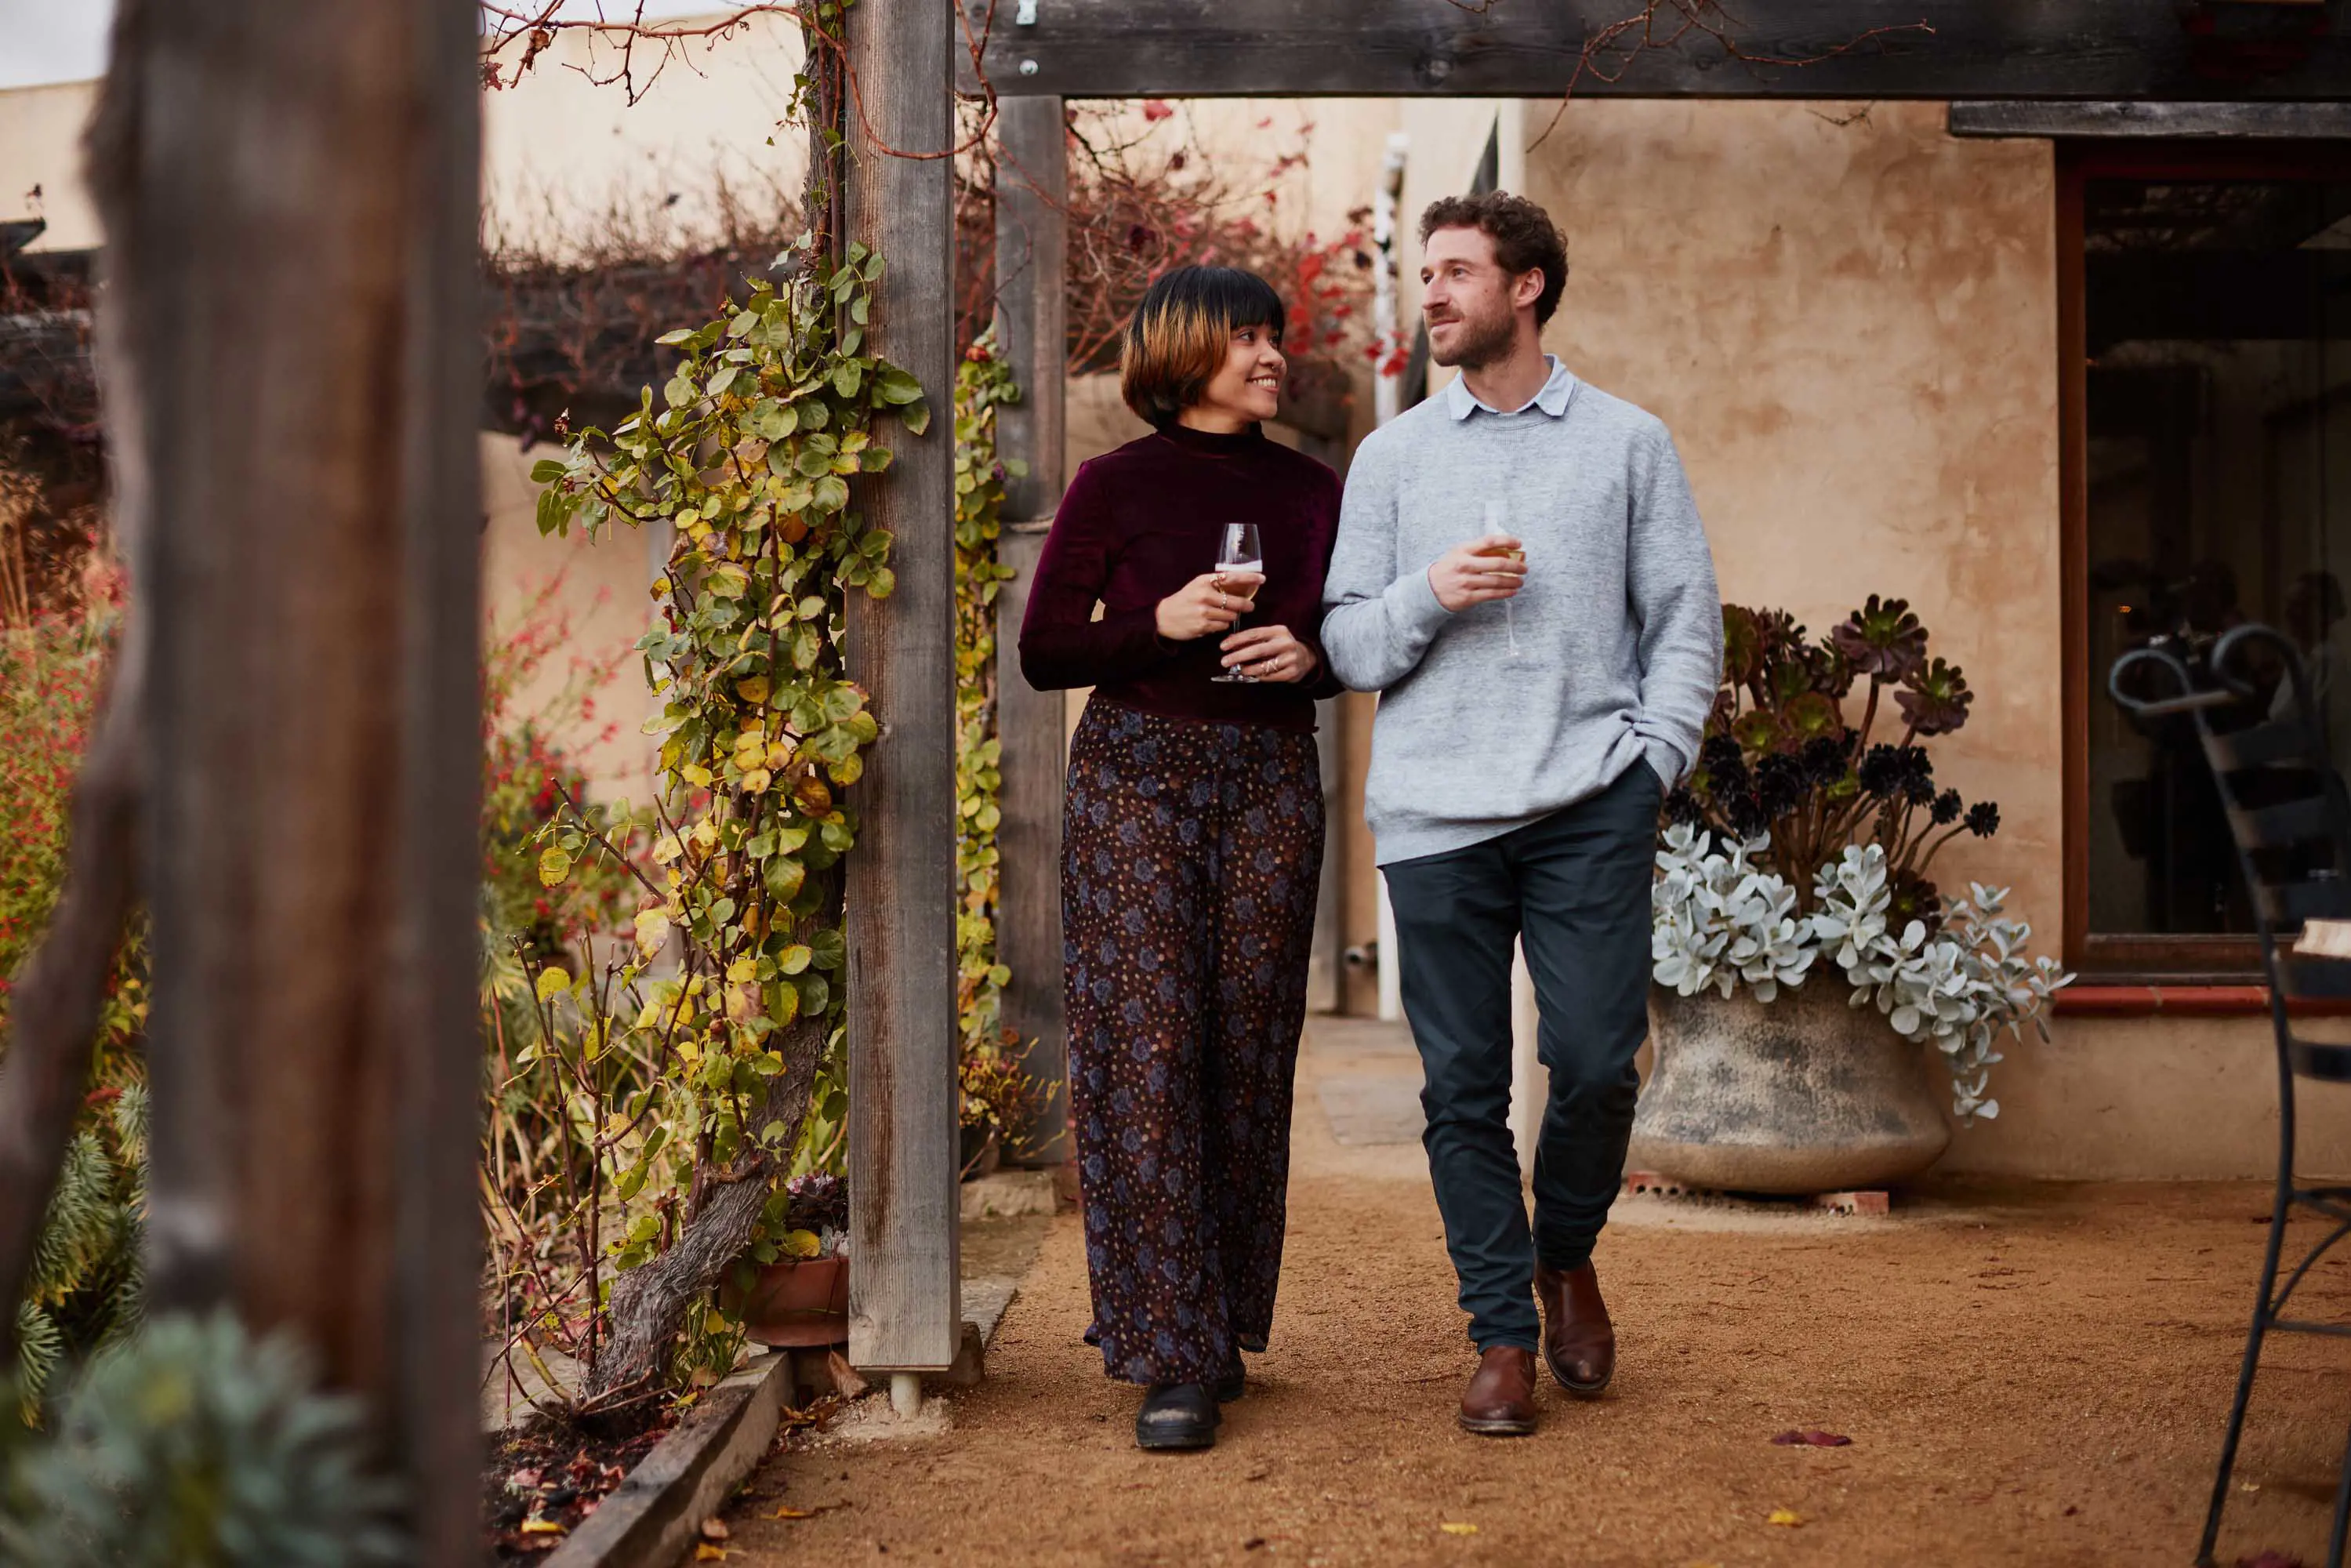 A young couple holding wine glasses and talking, walk beneath the verandah in a garden.